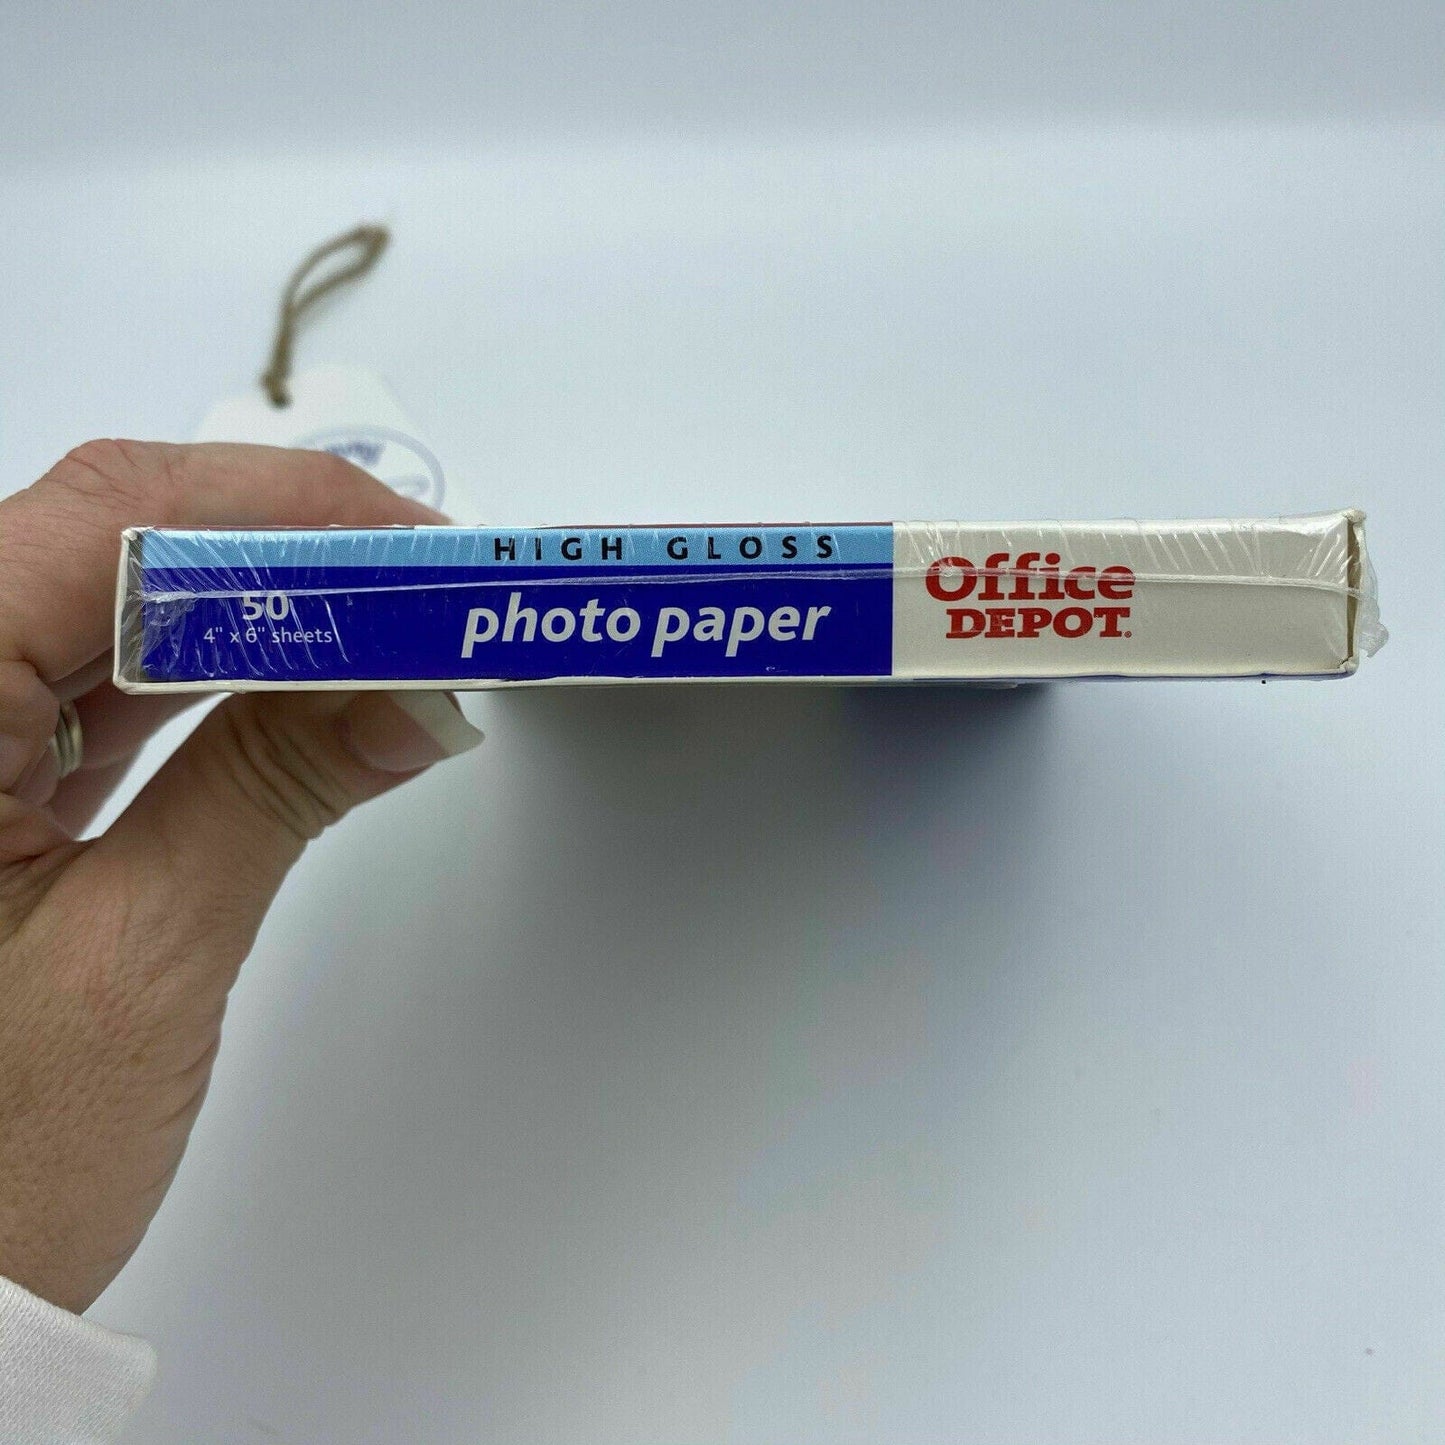 NEW Office Depot Photo Paper High Gloss for InkJet Printers 4"X6" 50 Sheets